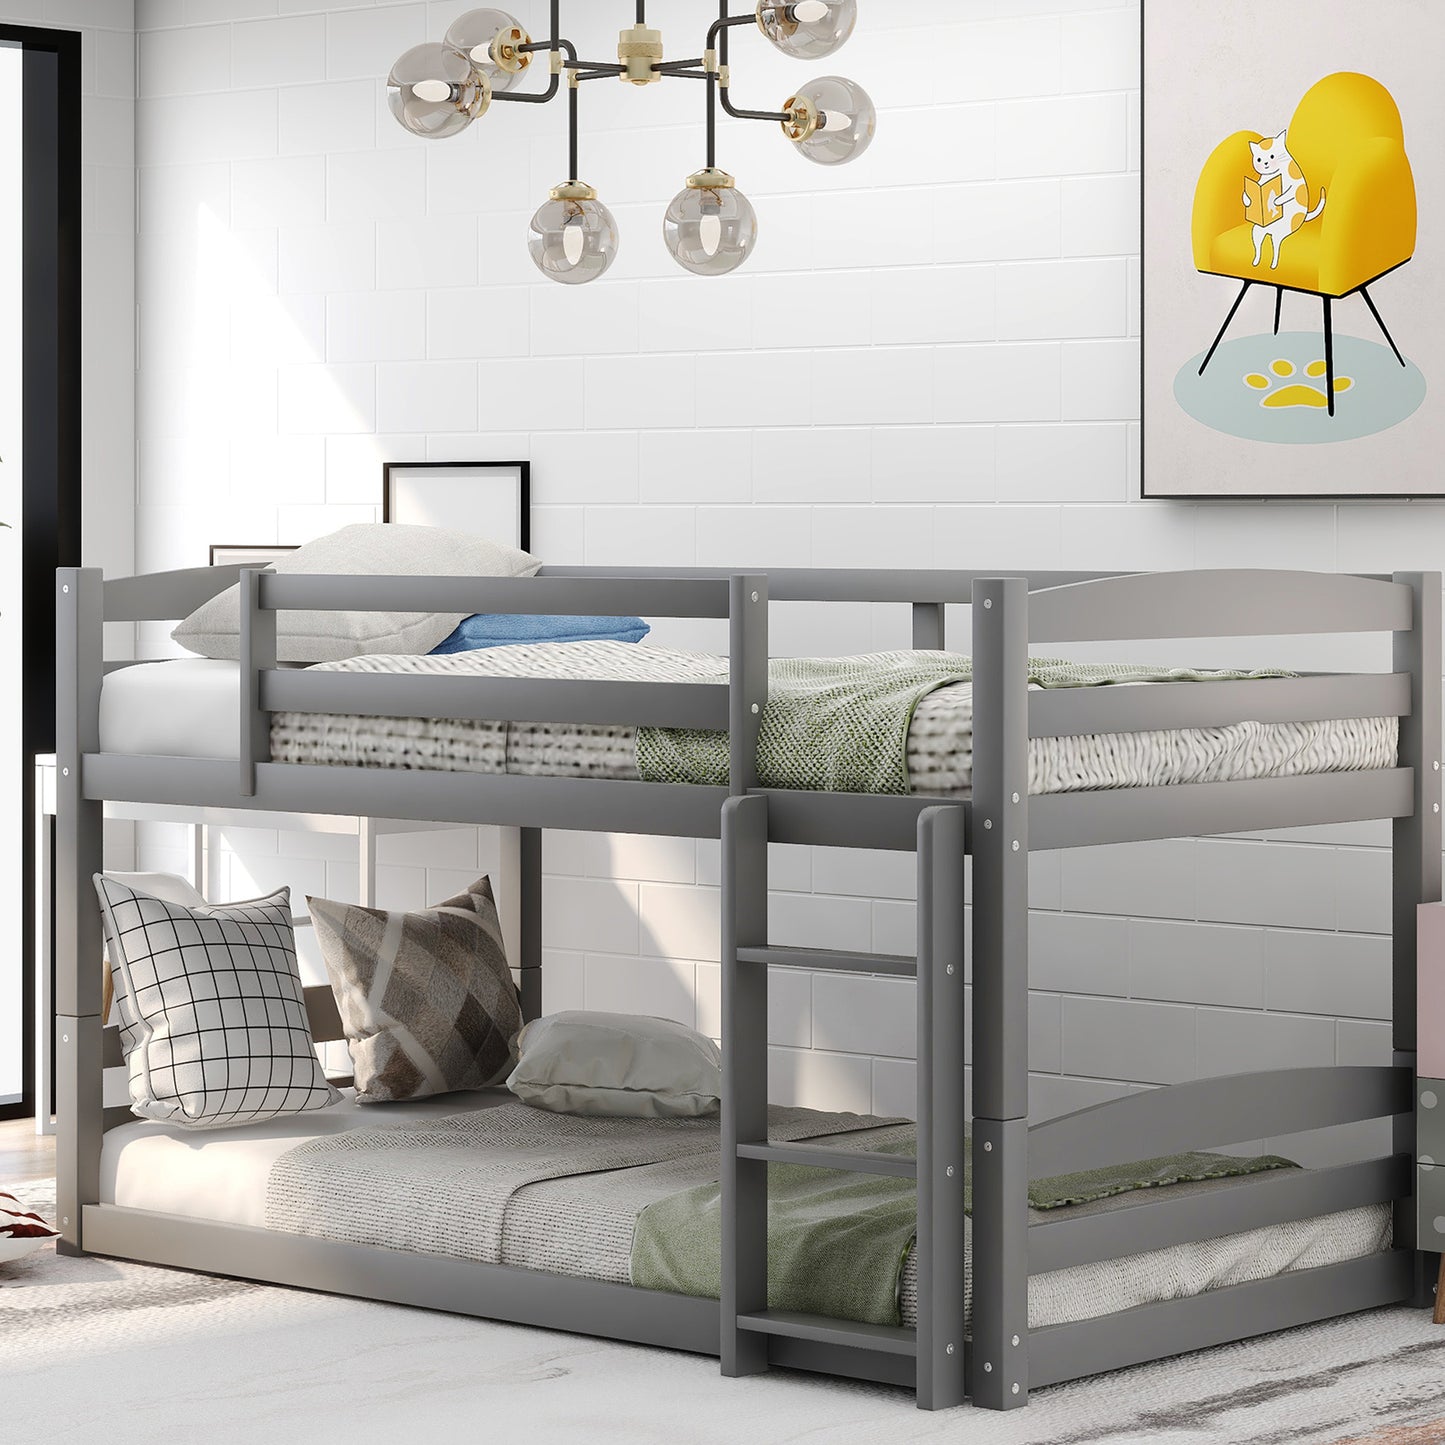 SYNGAR Twin over Twin Bunk Bed, Solid Wood Bunk Bed Frame with Ladder and Safety Guardrails, Bedroom Convertible Bunk Bed Furniture for Kids Teens Adults, No Box Spring Needed, C25